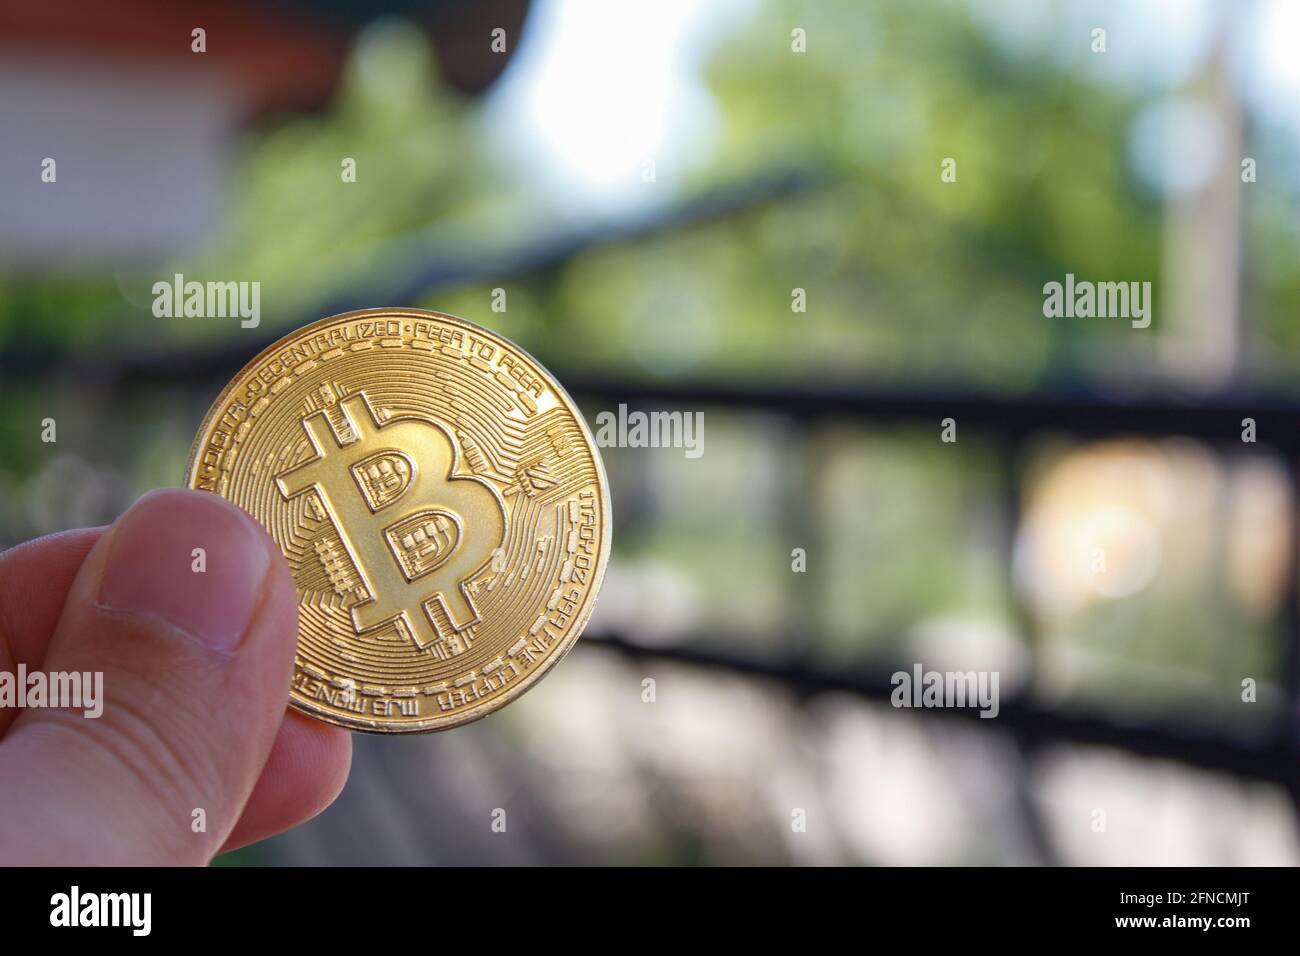 Close-up virtual bitcoin coin in hand. Man hand holding golden btc coin. Bitcoin is popular cryptocurrency. Stock Photo